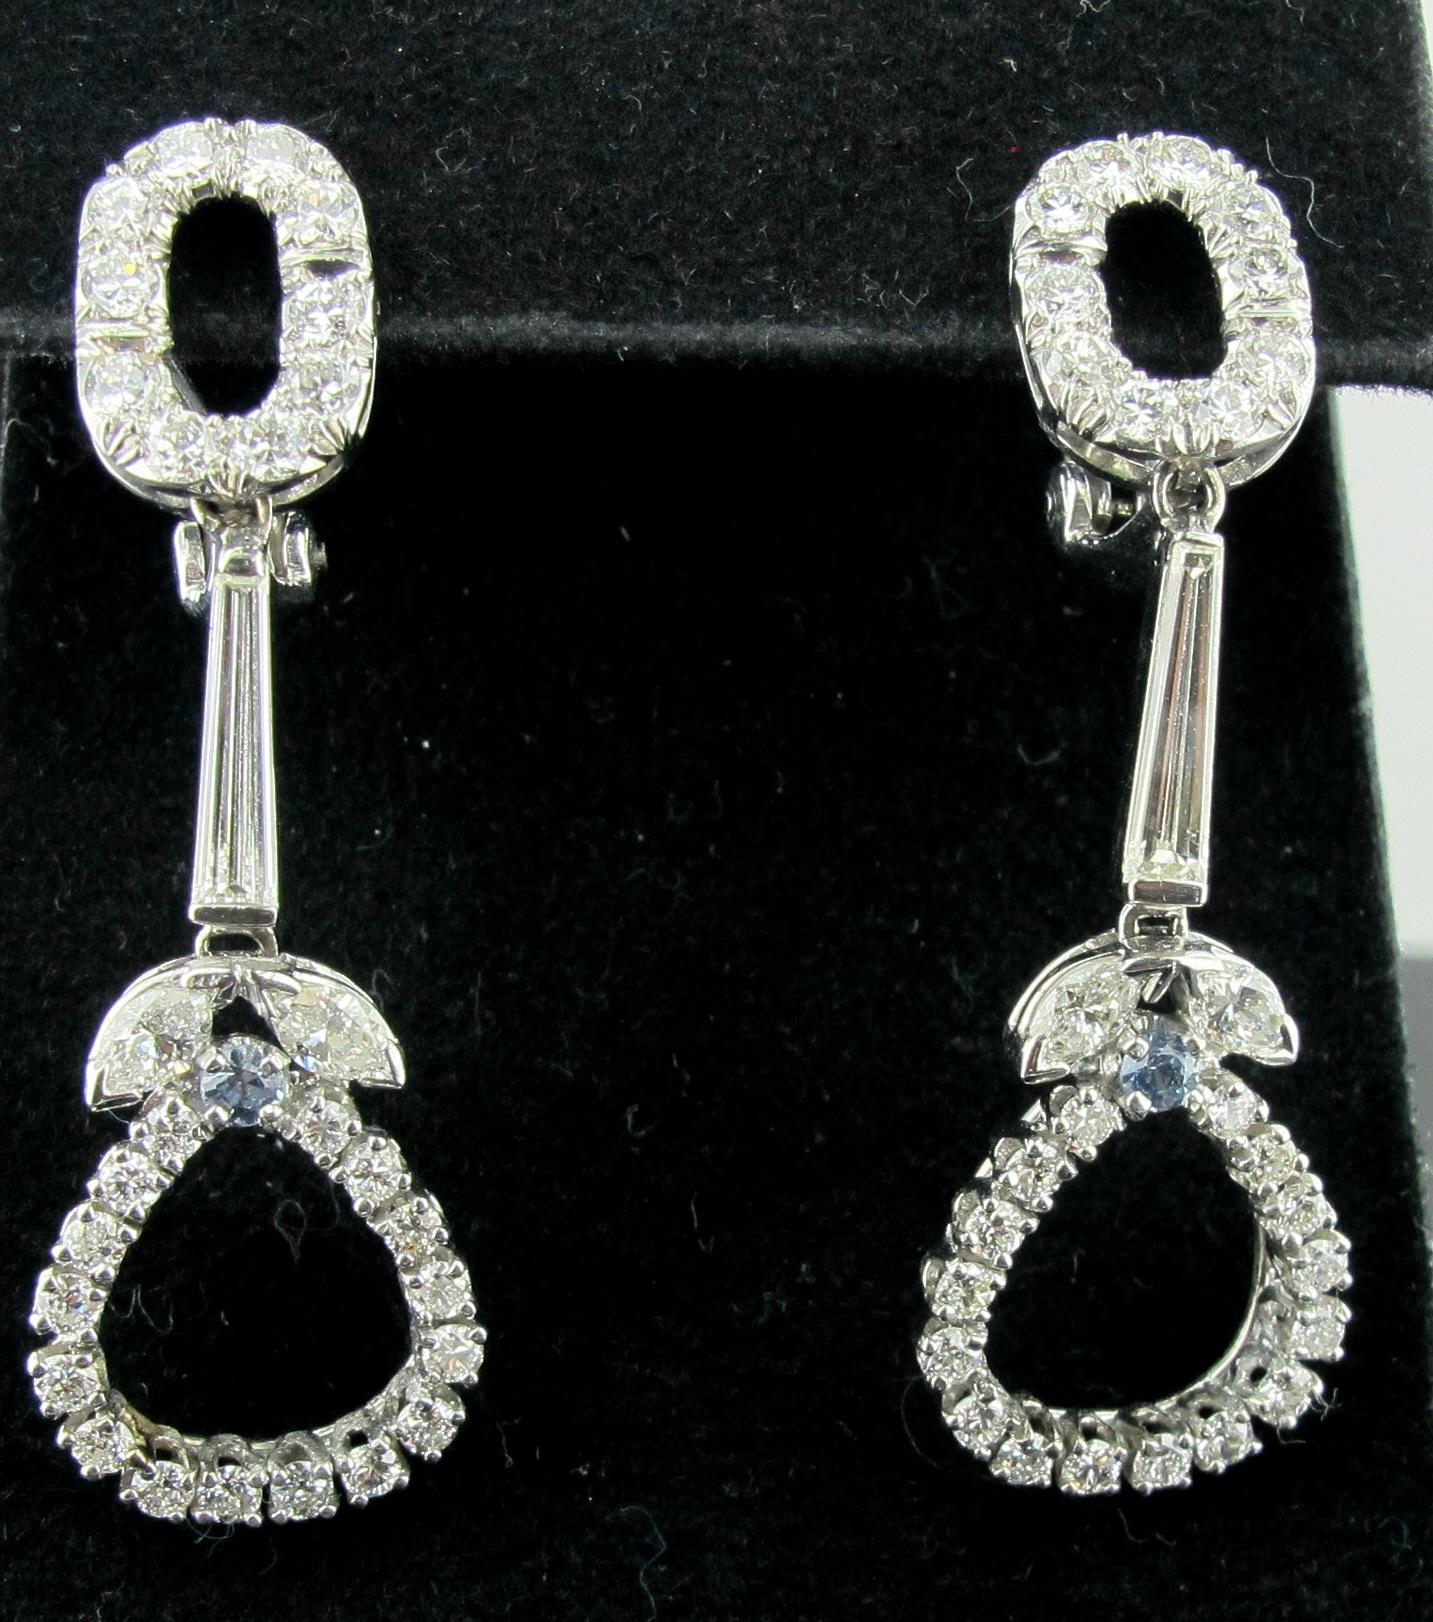 Set in 14 karat white gold tops with Platinum bottoms, are 58 diamonds with a total weight of 2.36 carats, G color, VS Clarity. Diamonds consist of 4 Marquise, 2 Baguettes, and 52 round brilliant cuts.  Also included are two round aquamarines